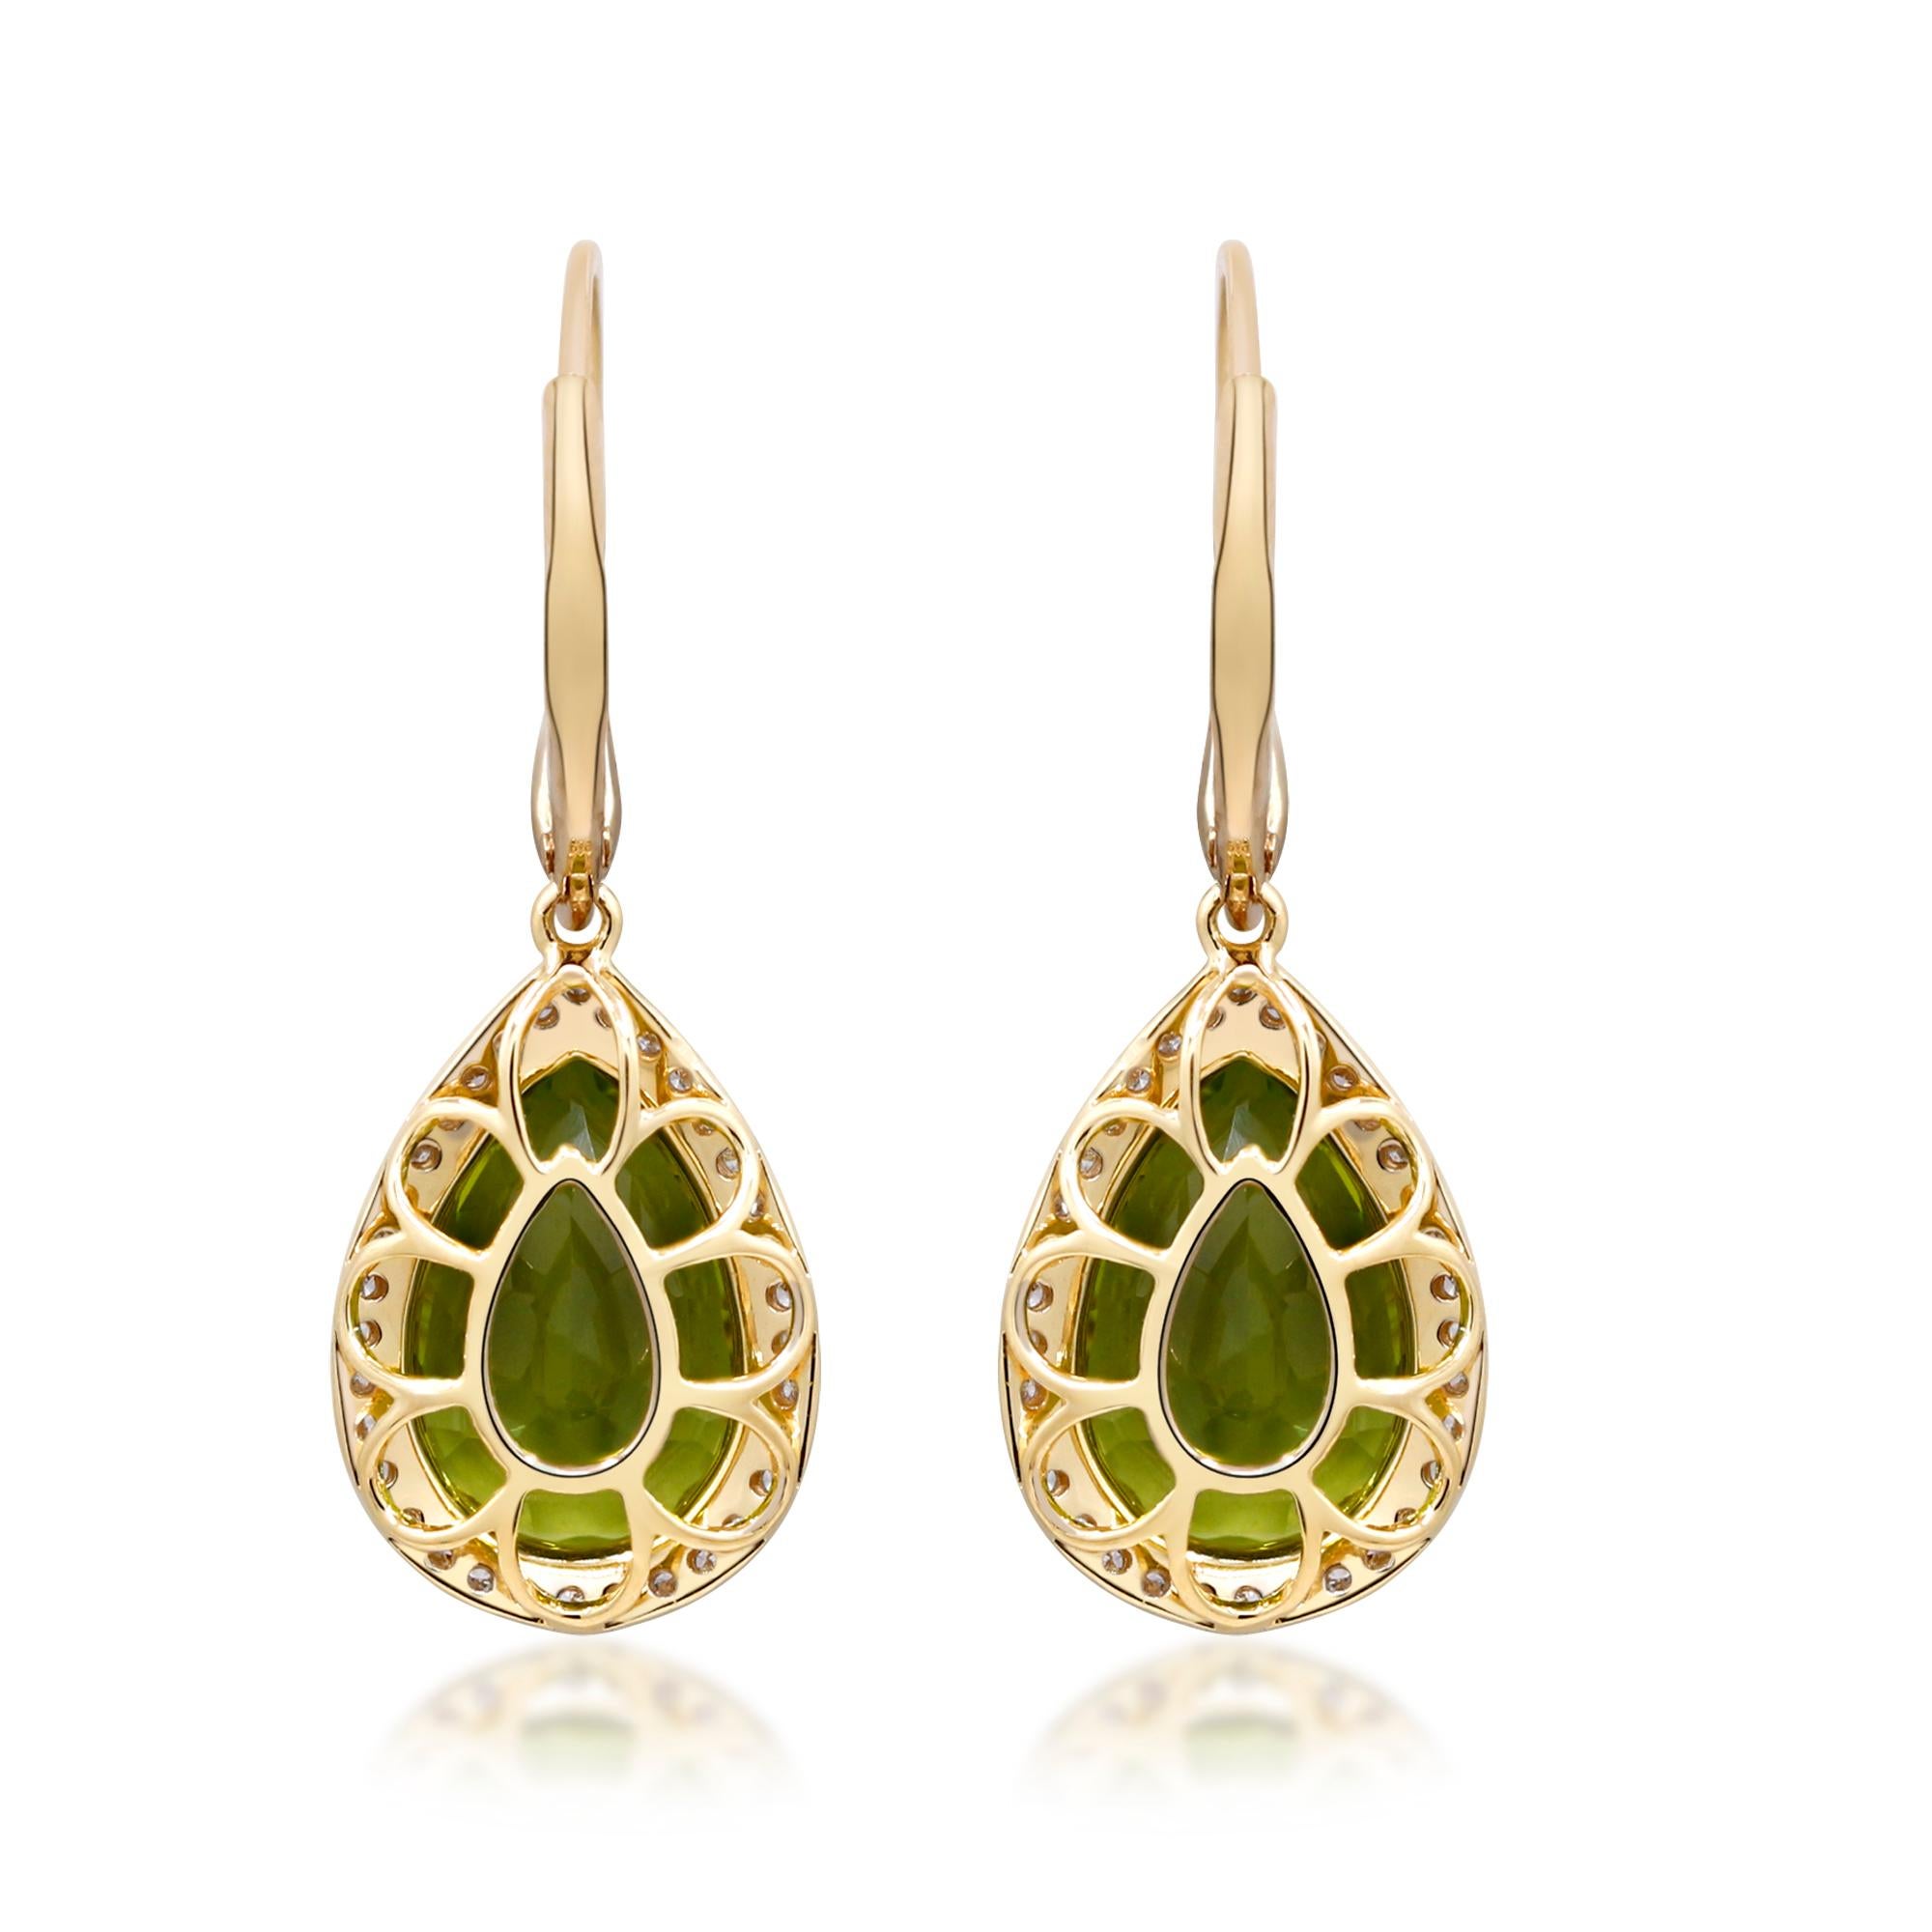 Decorate yourself in elegance with this Earring is crafted from 14-karat Yellow Gold by Gin & Grace. This Earring is made up of pear-cut Peridot (2 Pcs) 8.32 carat and Round-cut White Diamond (68 Pcs) 0.18 Carat. This Earring is weight 3.03 grams.